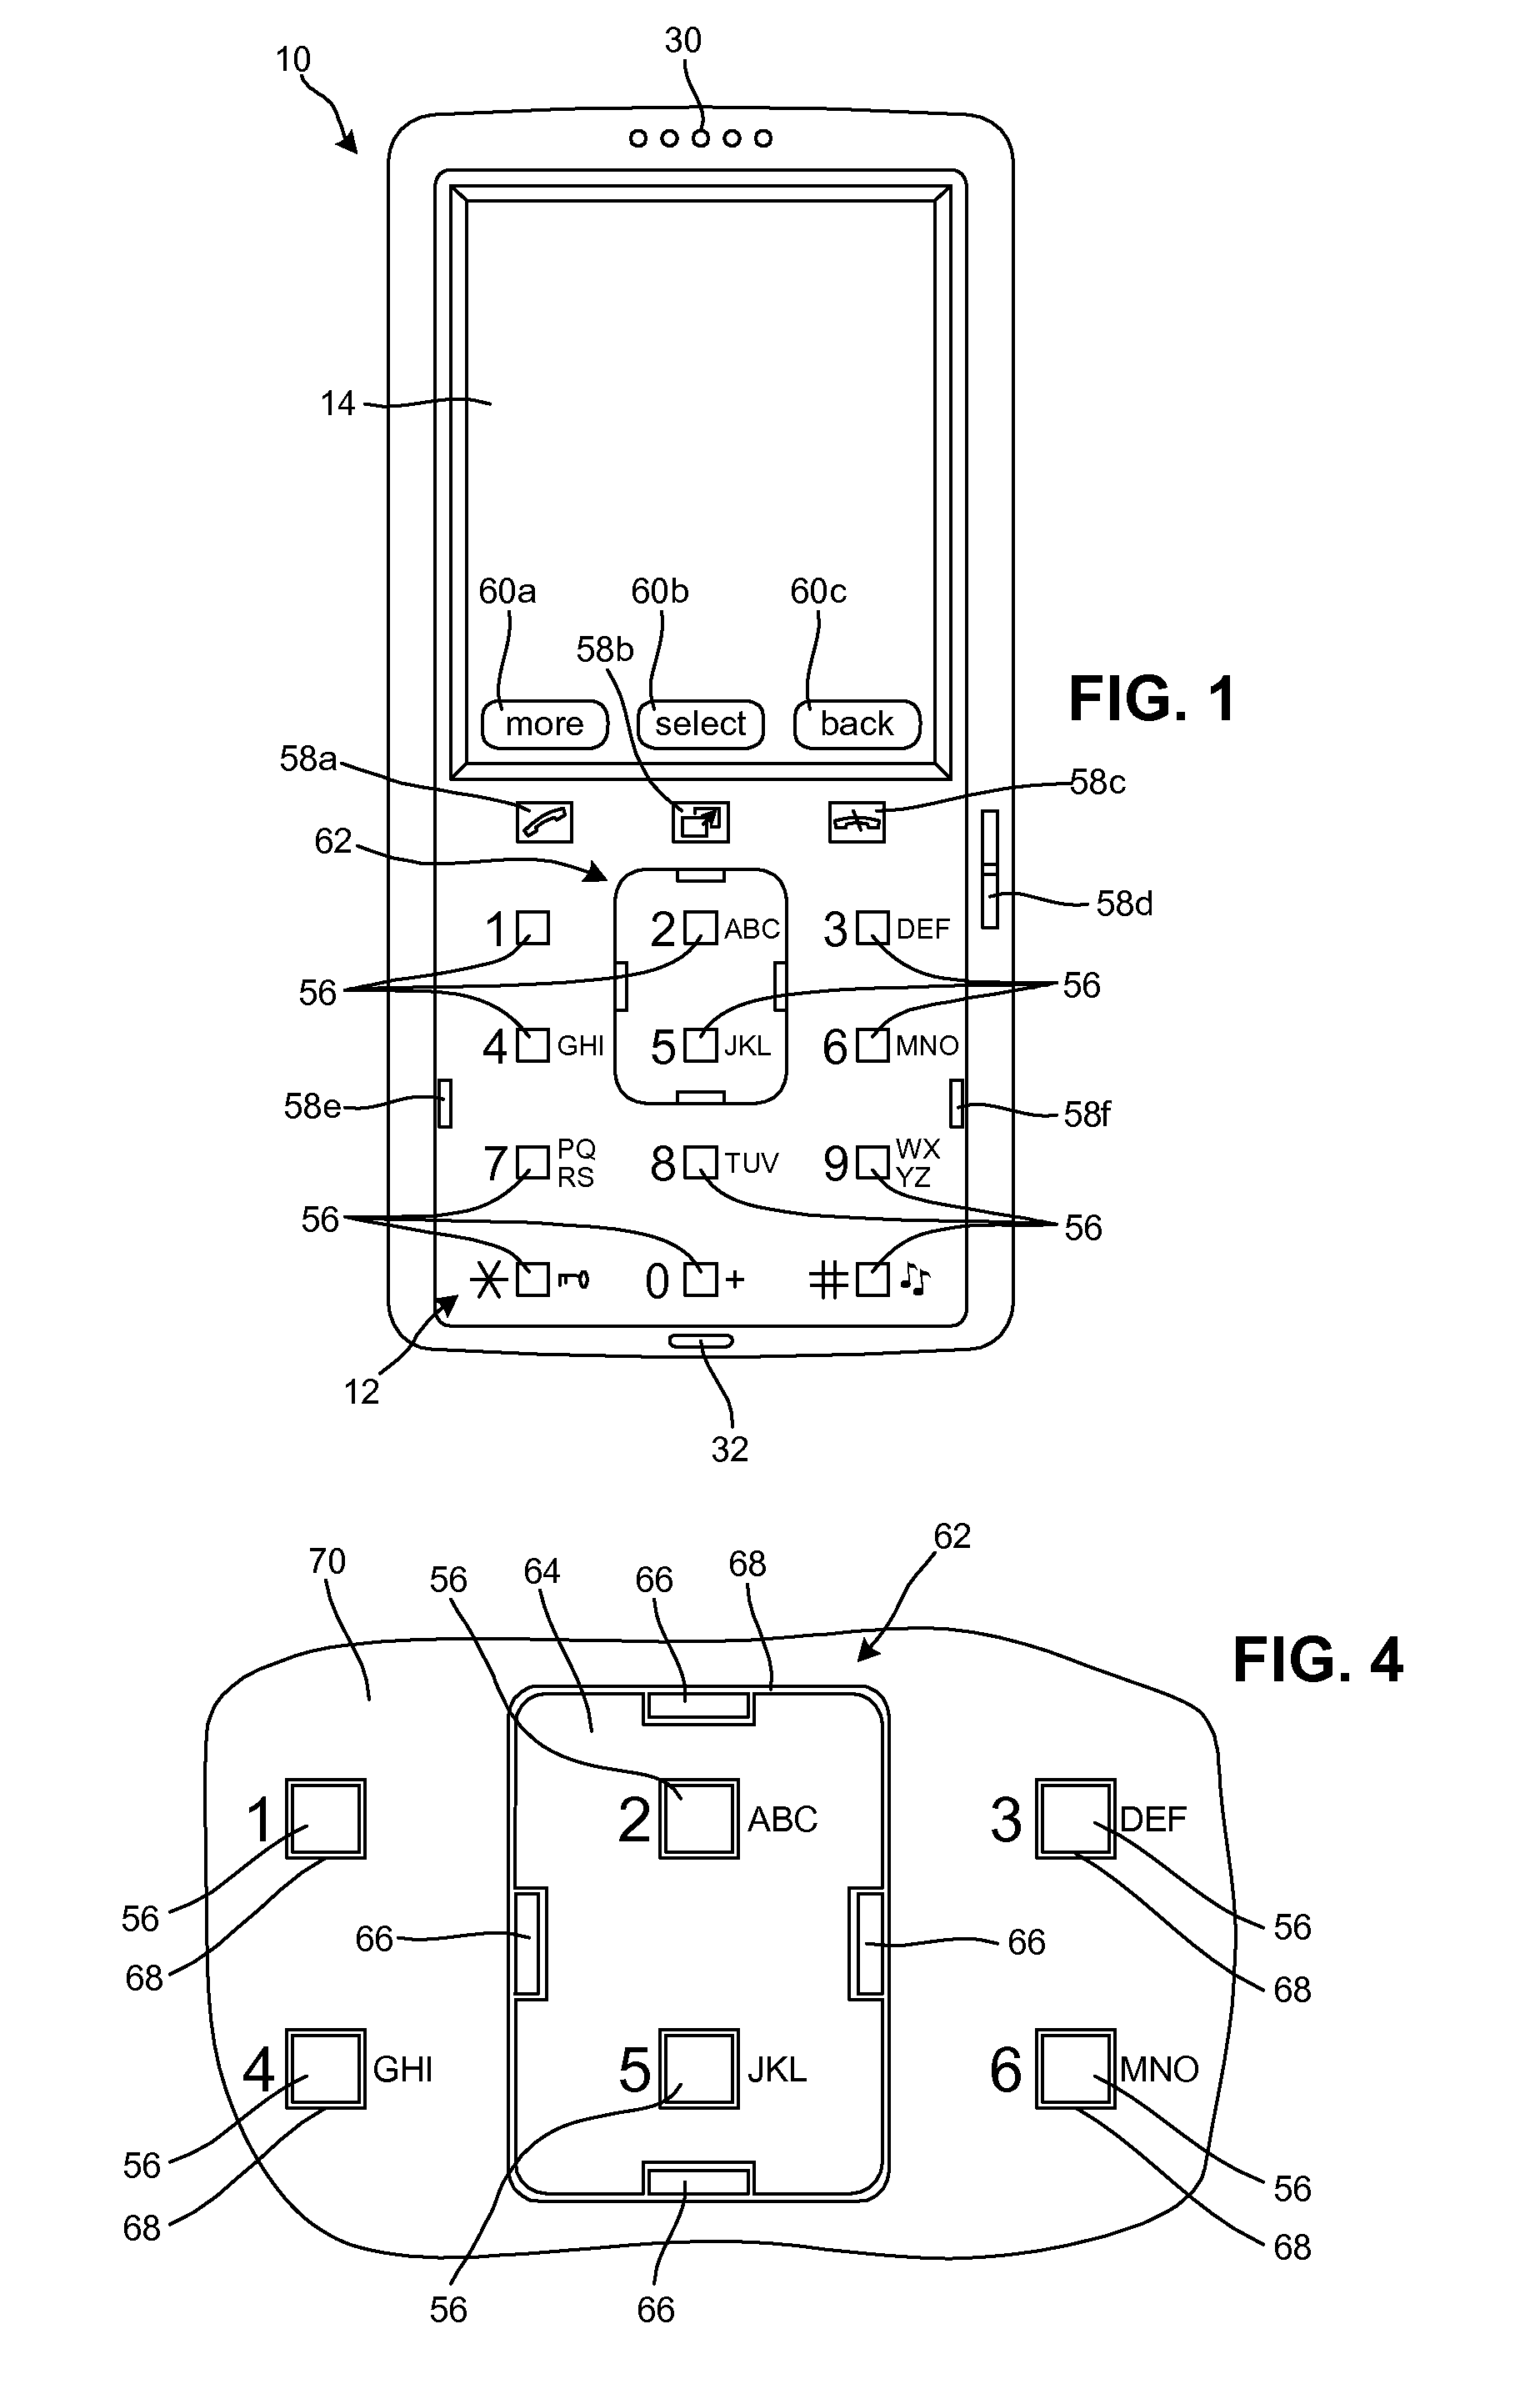 Electronic device with keypad assembly